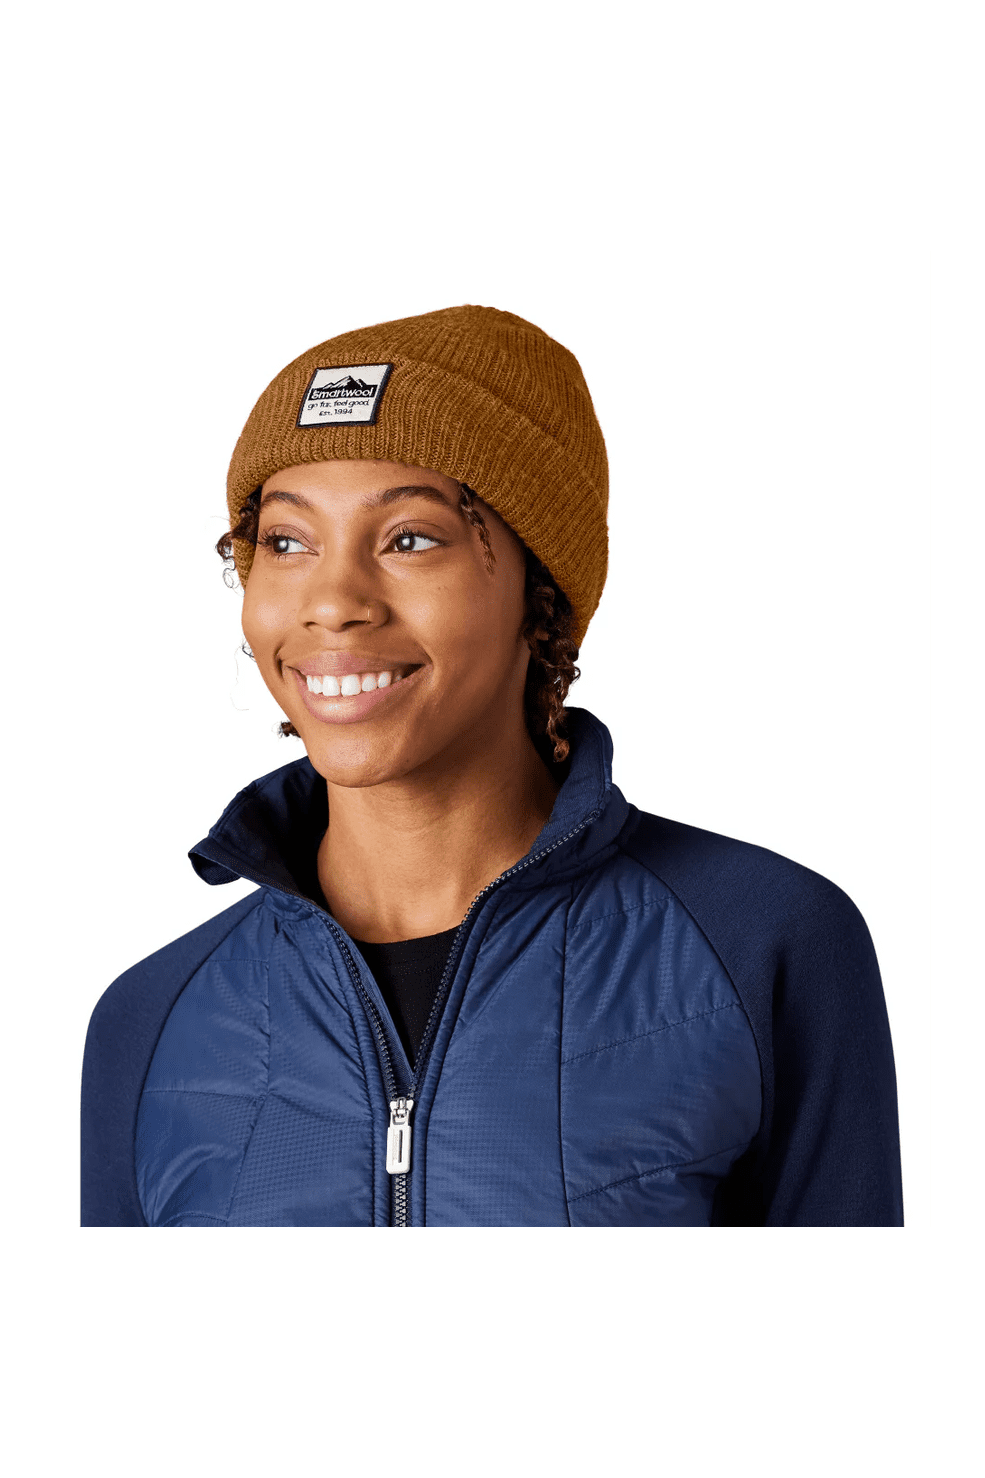 SMARTWOOL Patch Beanie